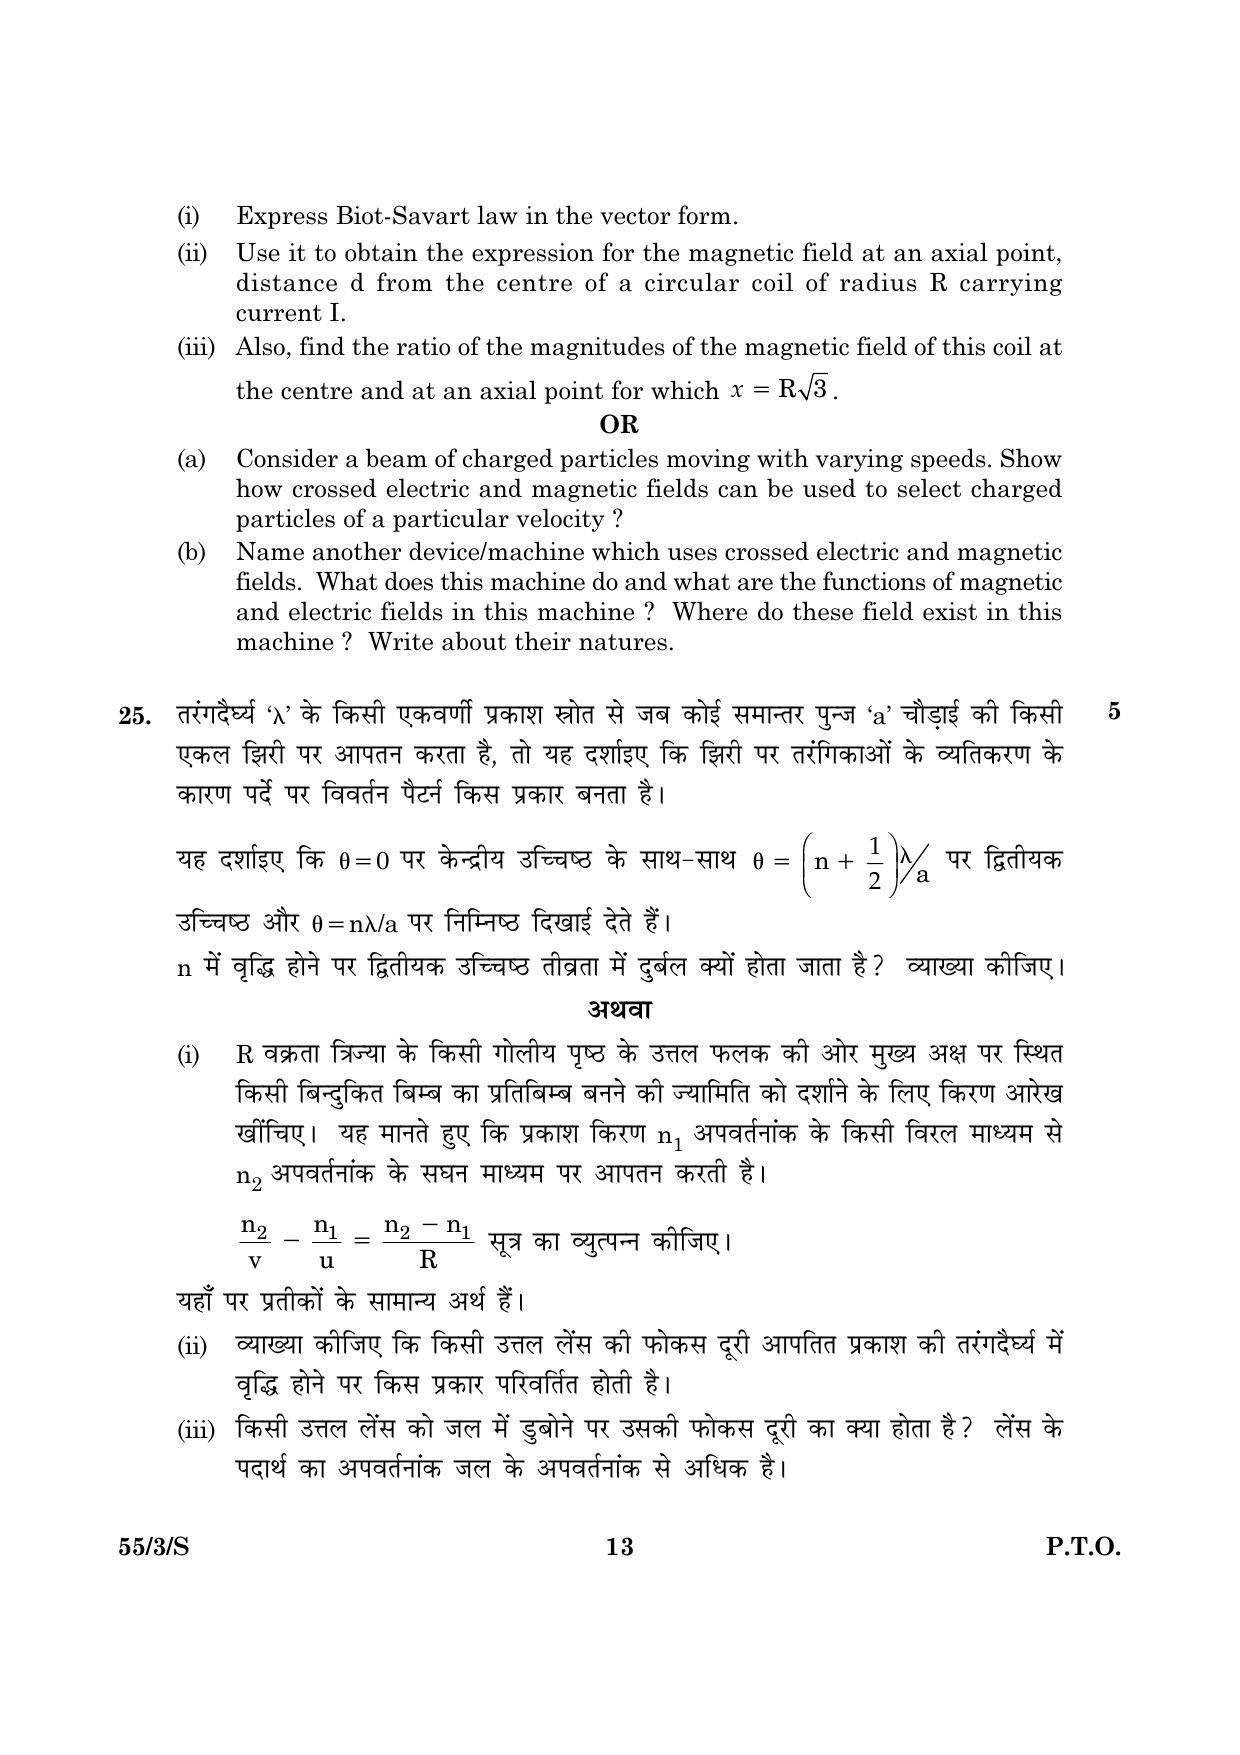 CBSE Class 12 055 Set 3 S Physics Theory 2016 Question Paper - Page 13